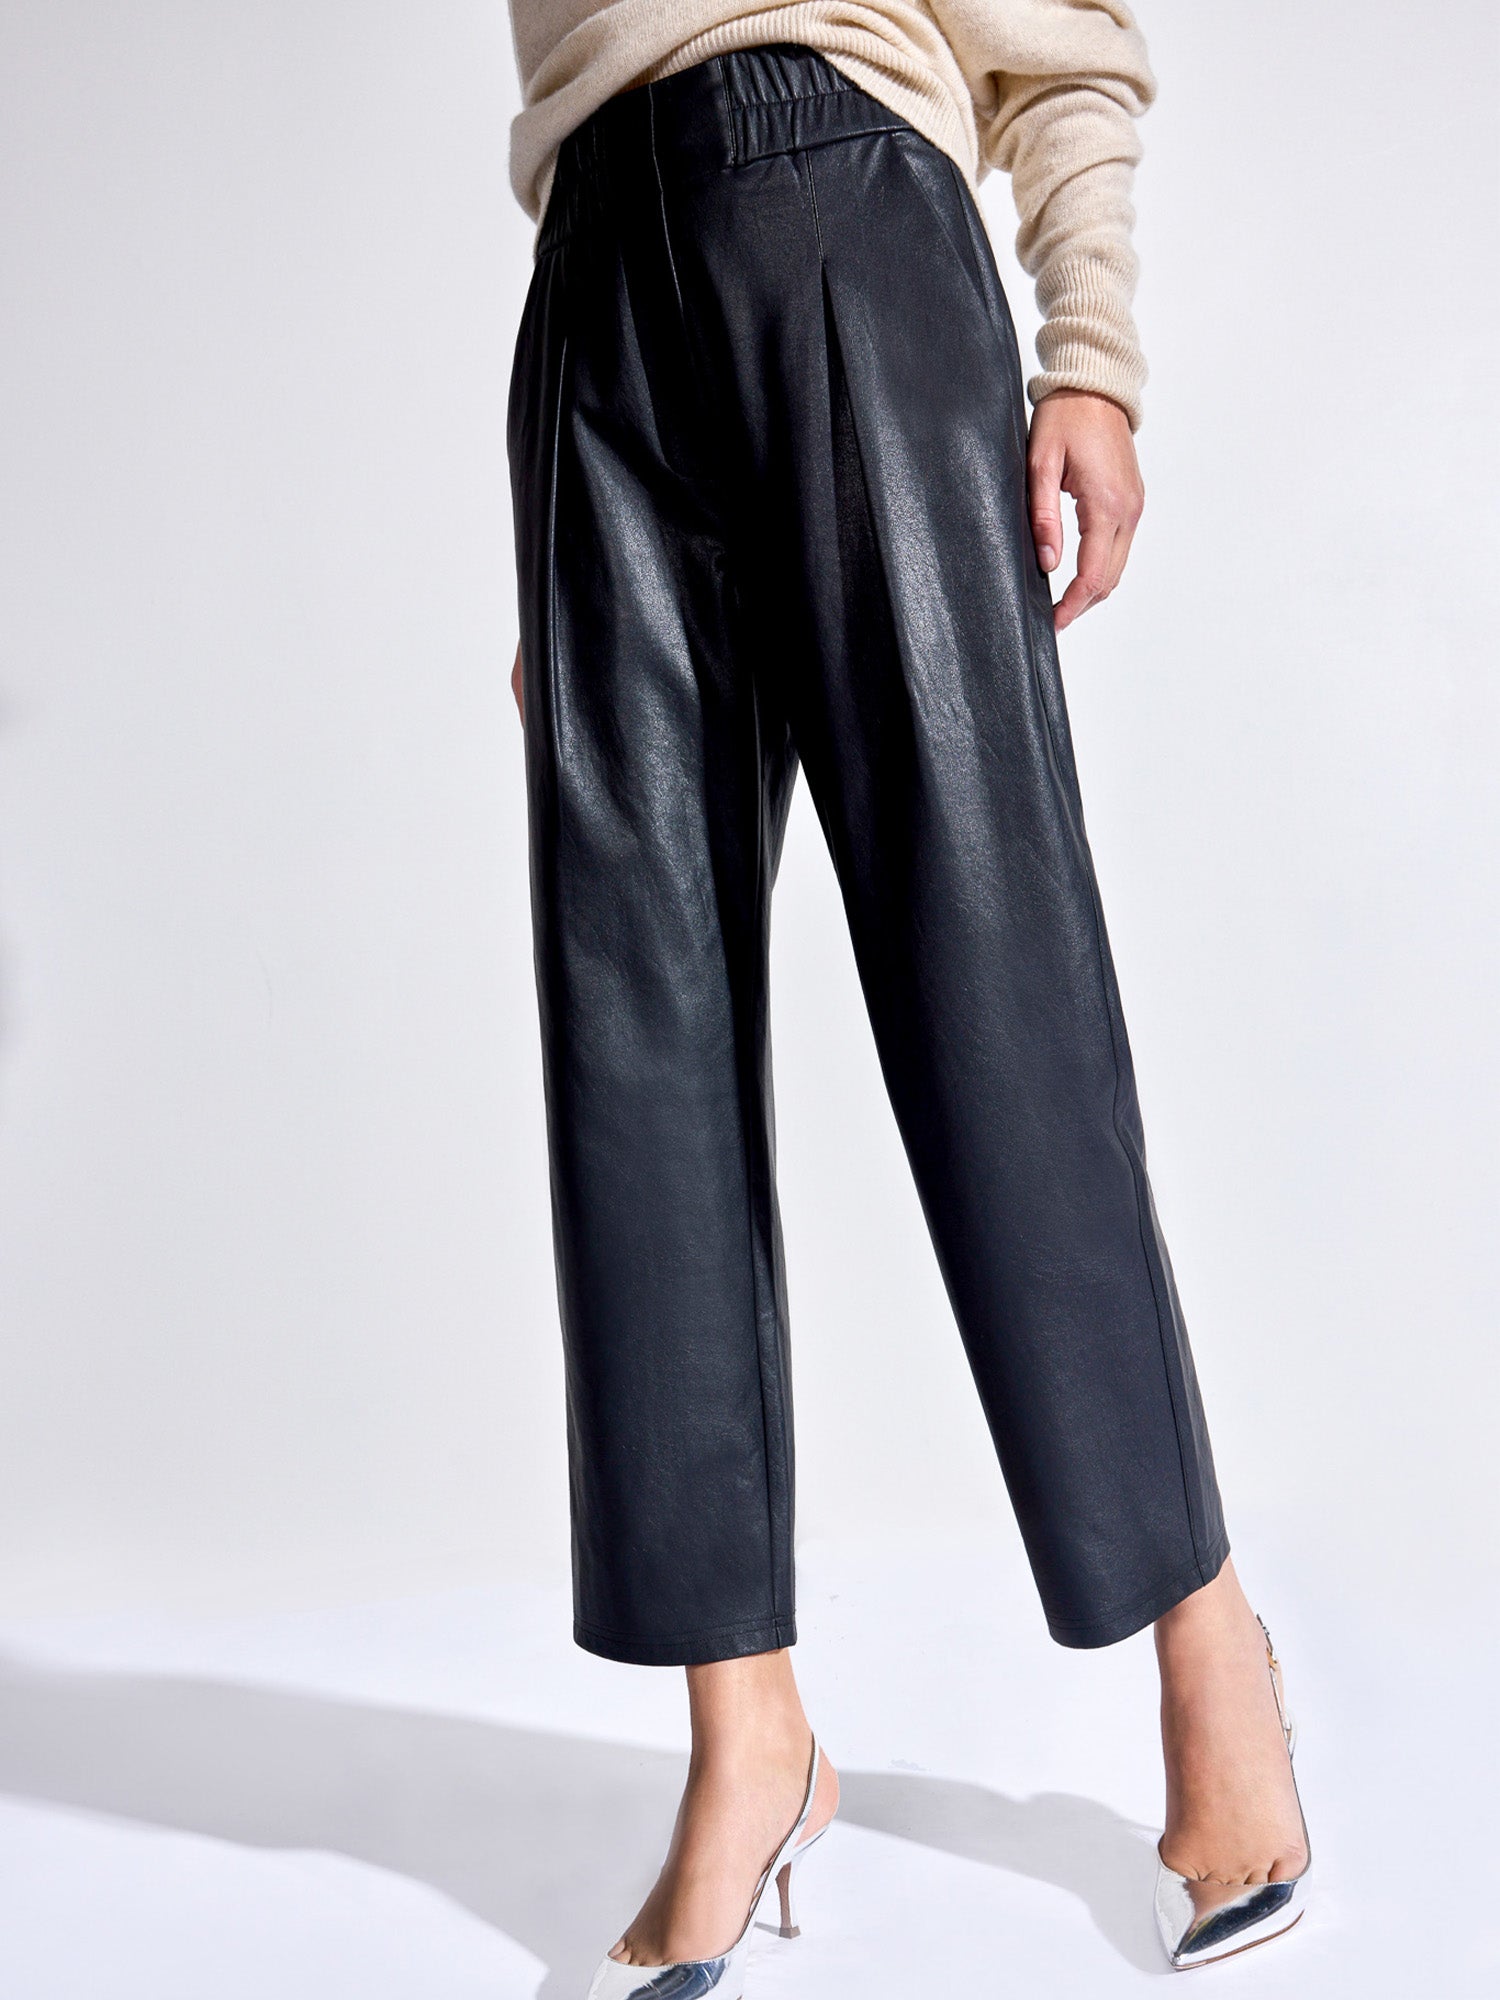 Vegan Leather Pants Women, Faux Leather Pants Women, Leather Bell Bottoms  Trousers, Beige Leather Pants for Women, Leather Flares -  Israel